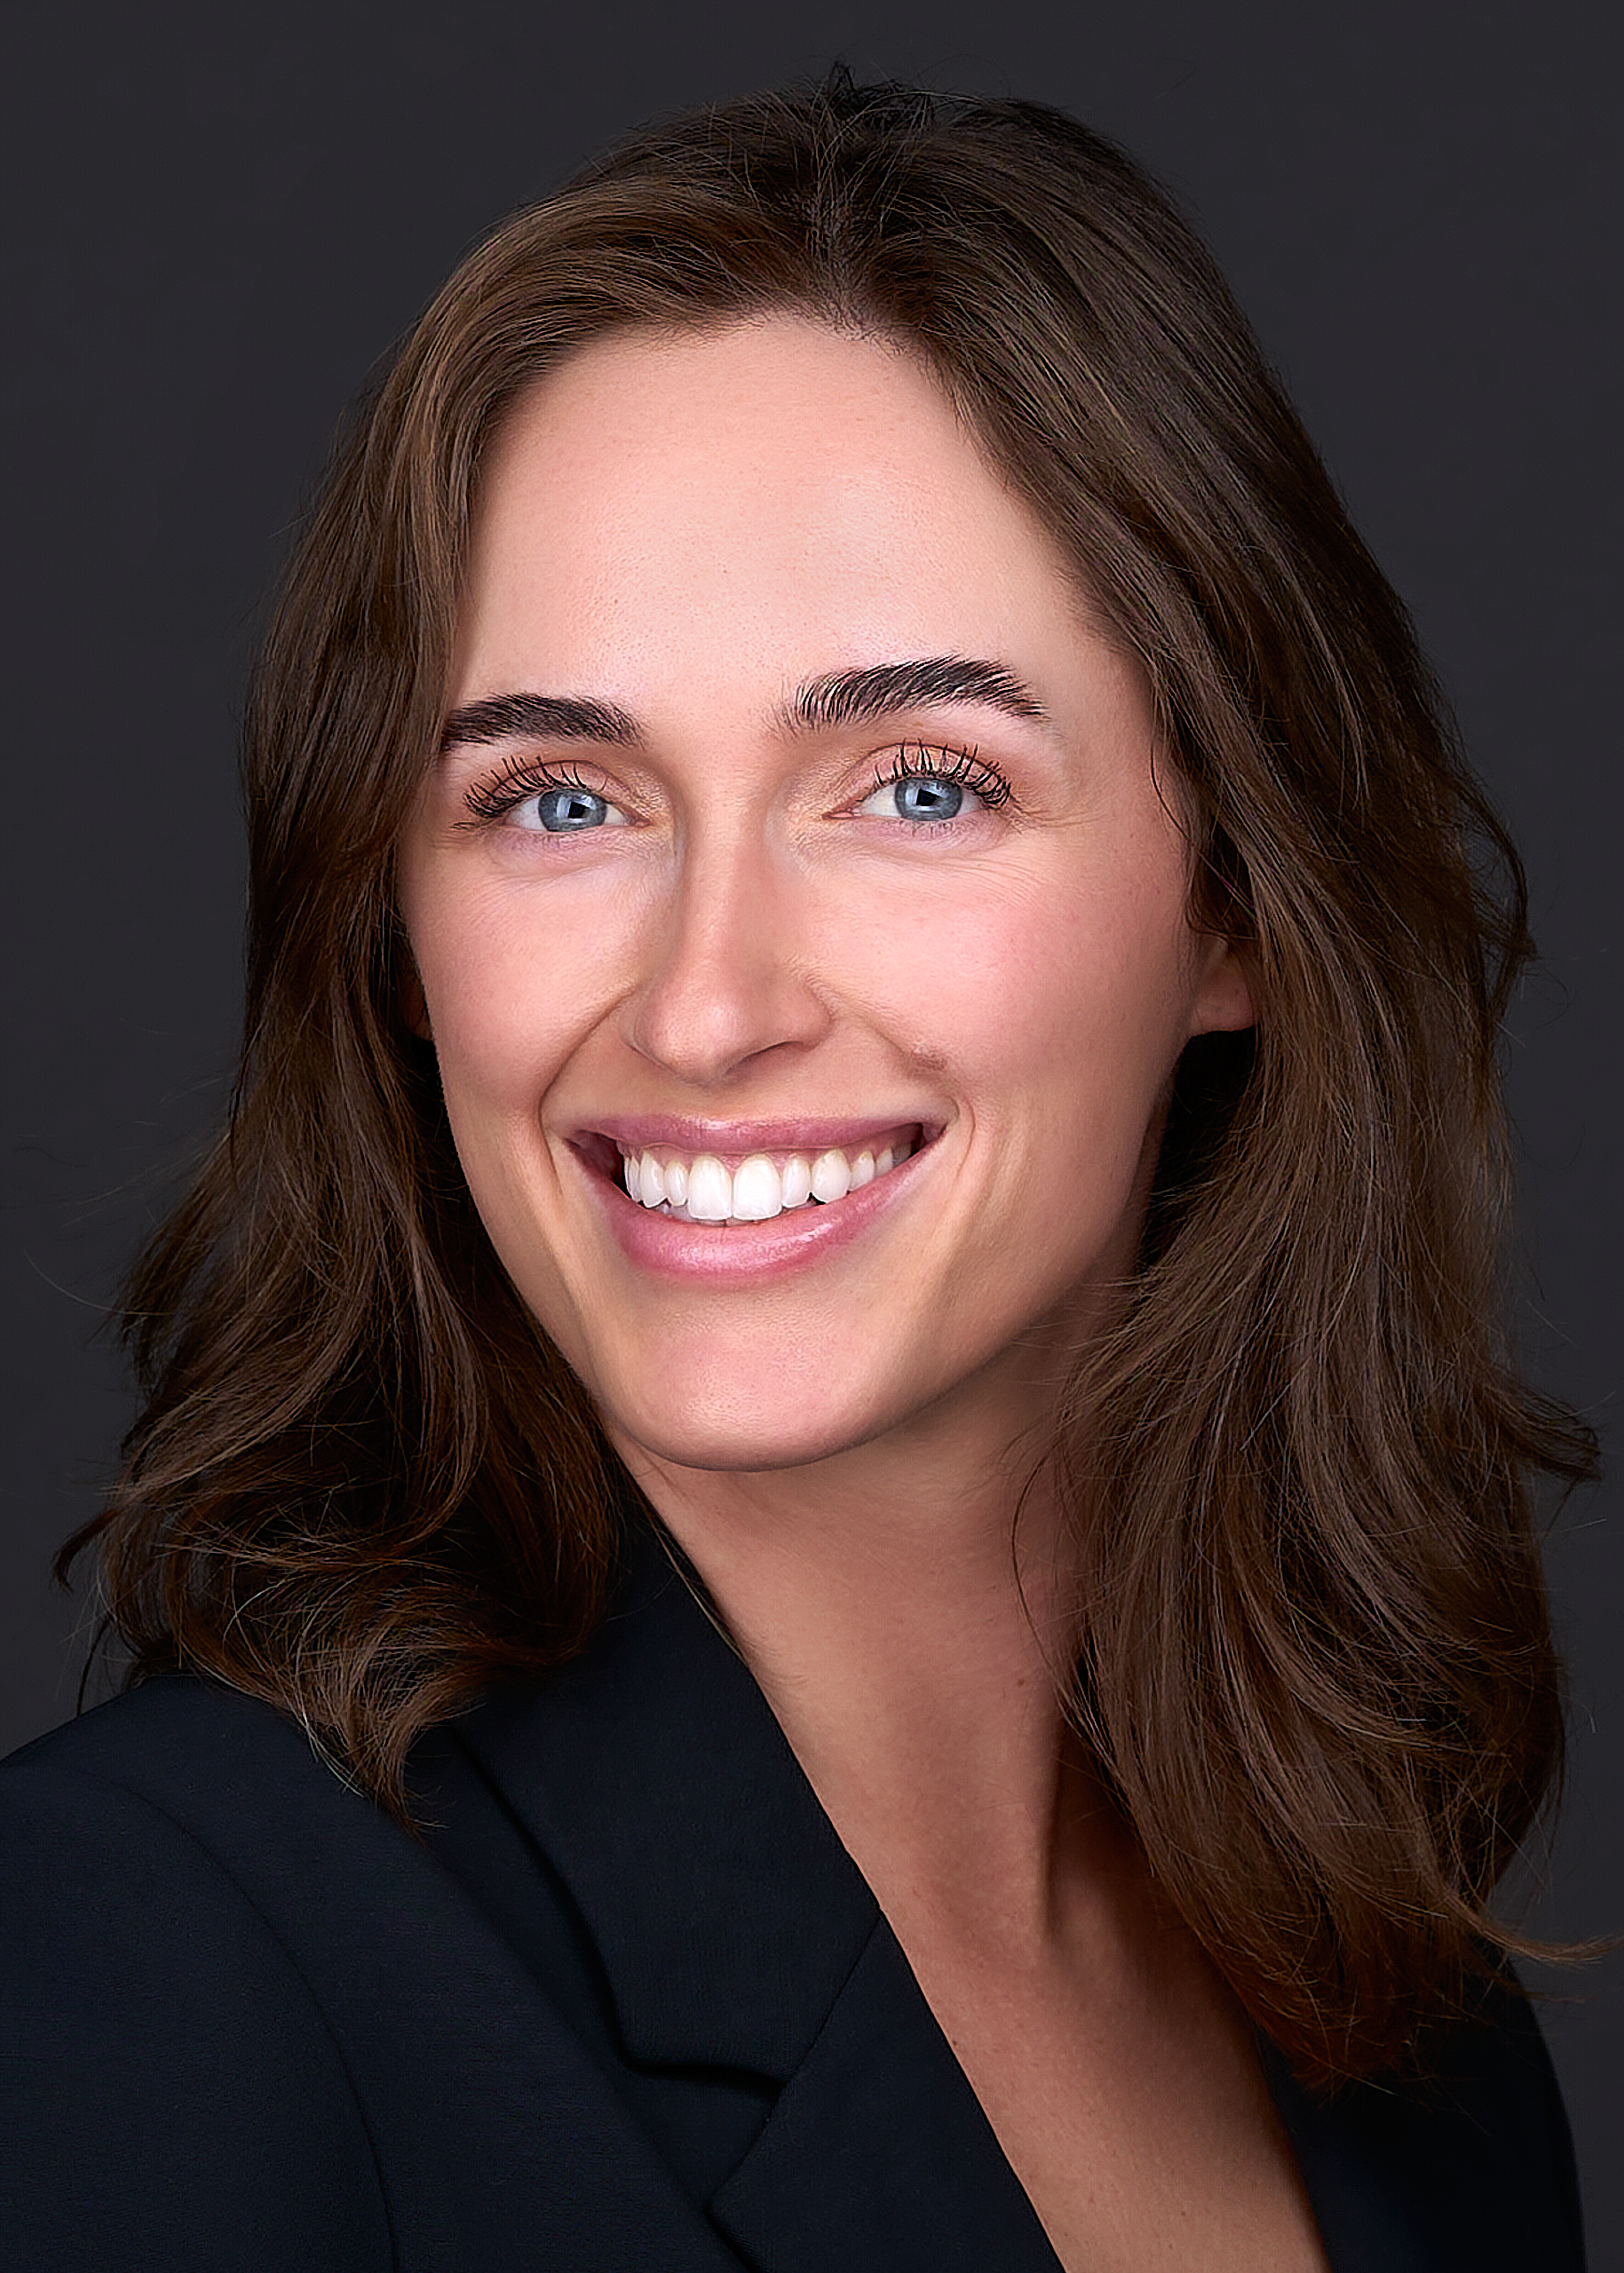 A business women wearing a black jacket and blue blouse poses for a professional headshot in a portrait studio in Raleigh NC